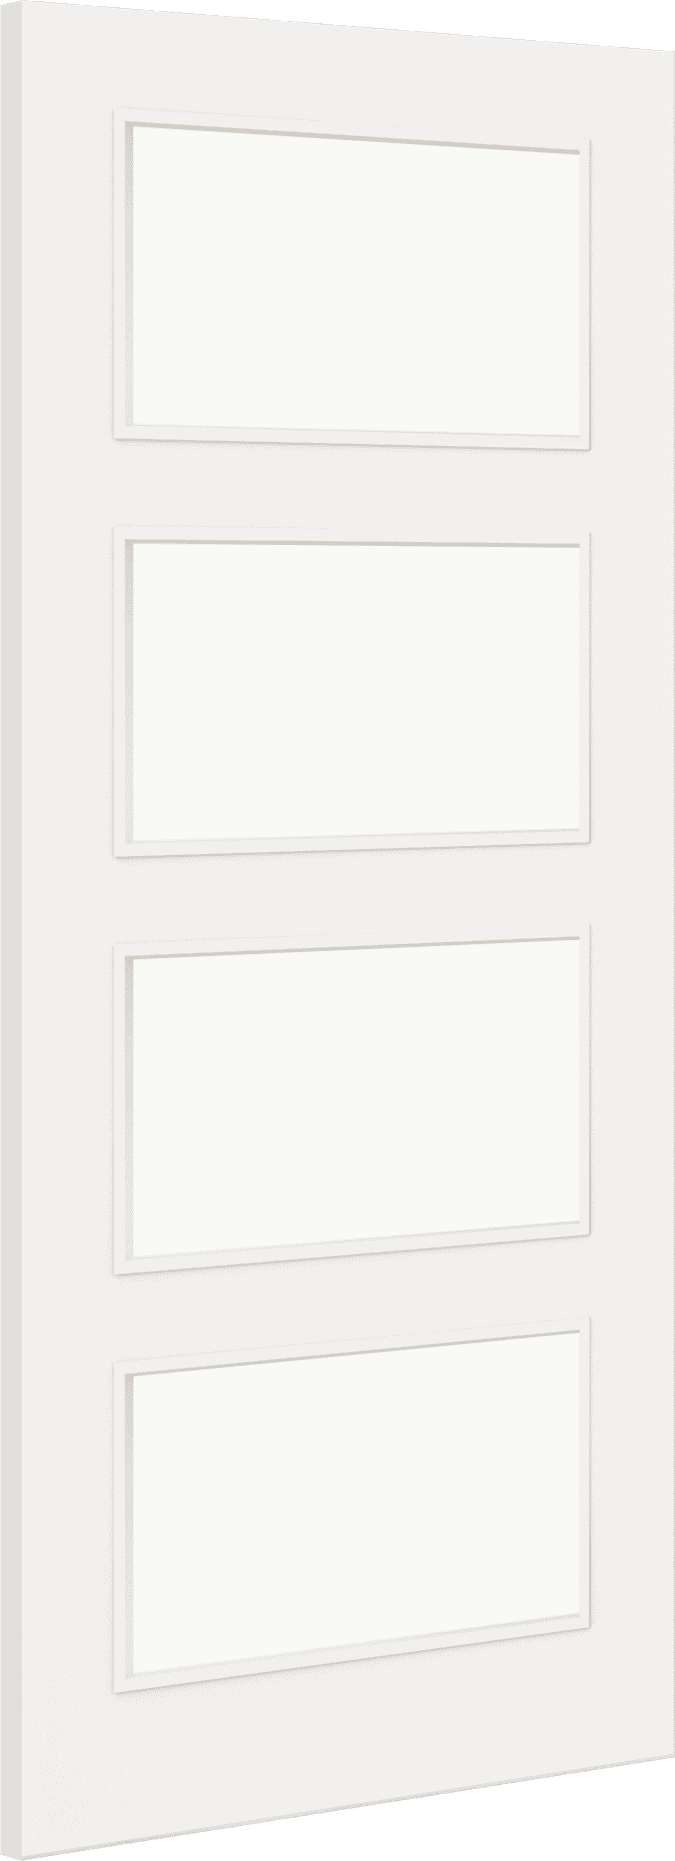 1981mm x 762mm x 44mm (30") Architectural Paint Grade White 04 Clear Glazed Fire Door Blank